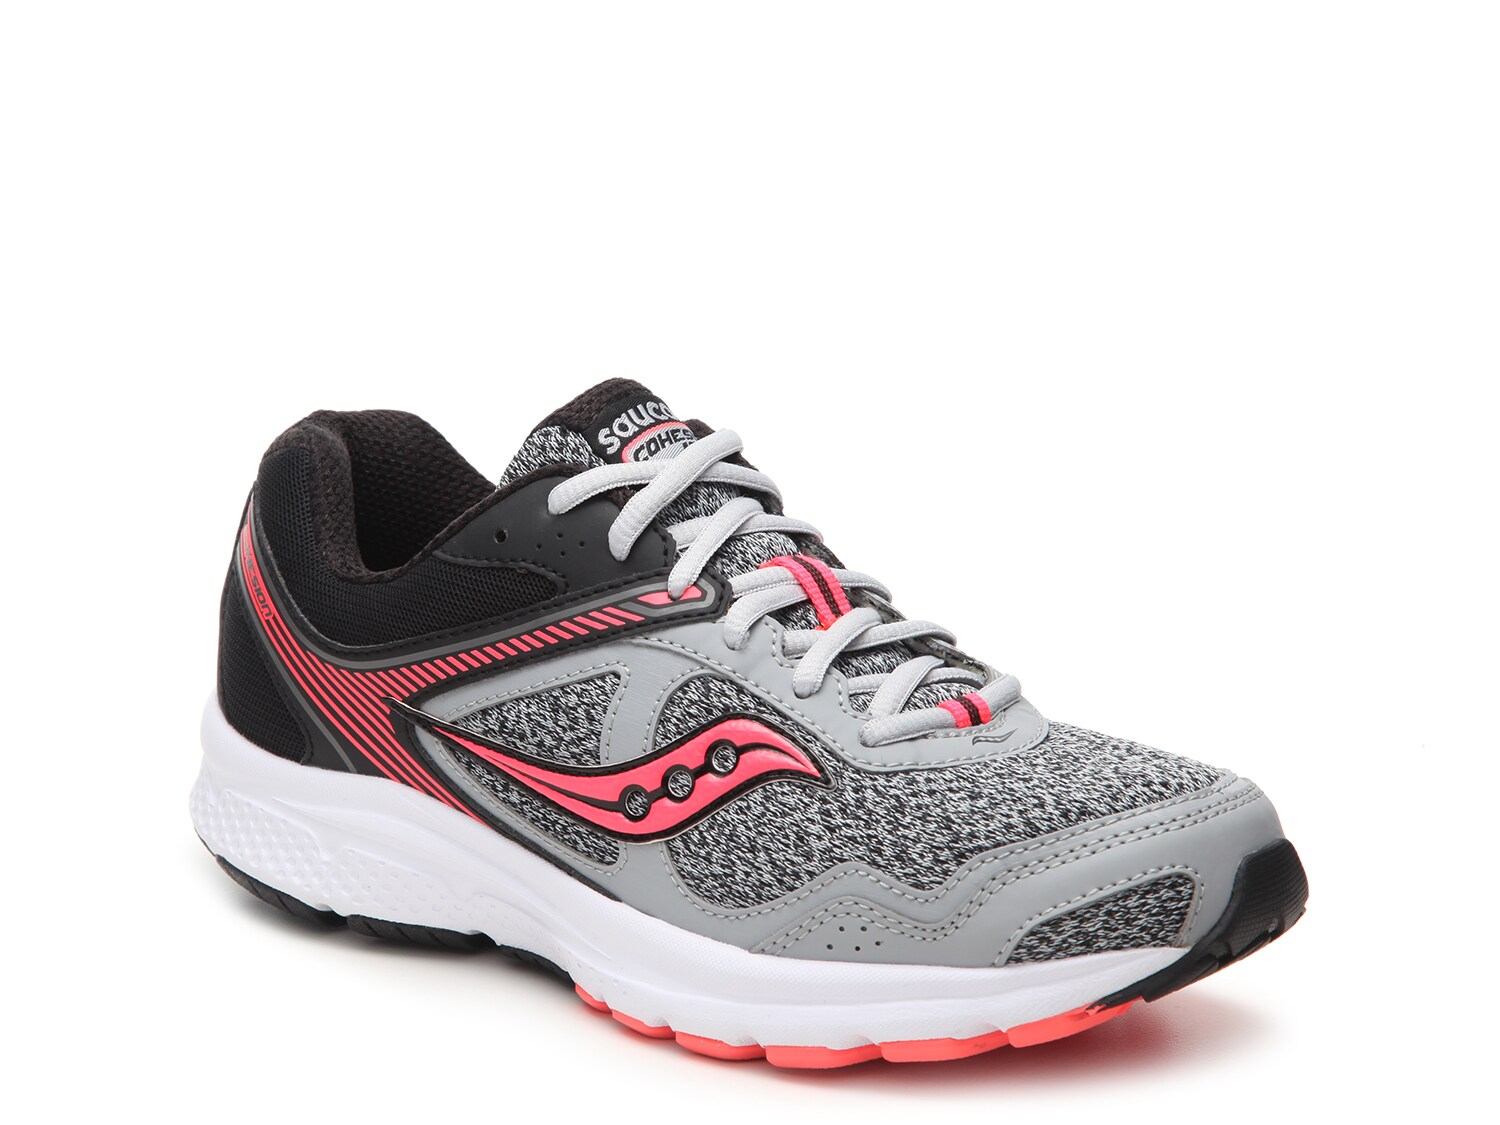 Saucony Cohesion 10 Fabric Running Shoe 